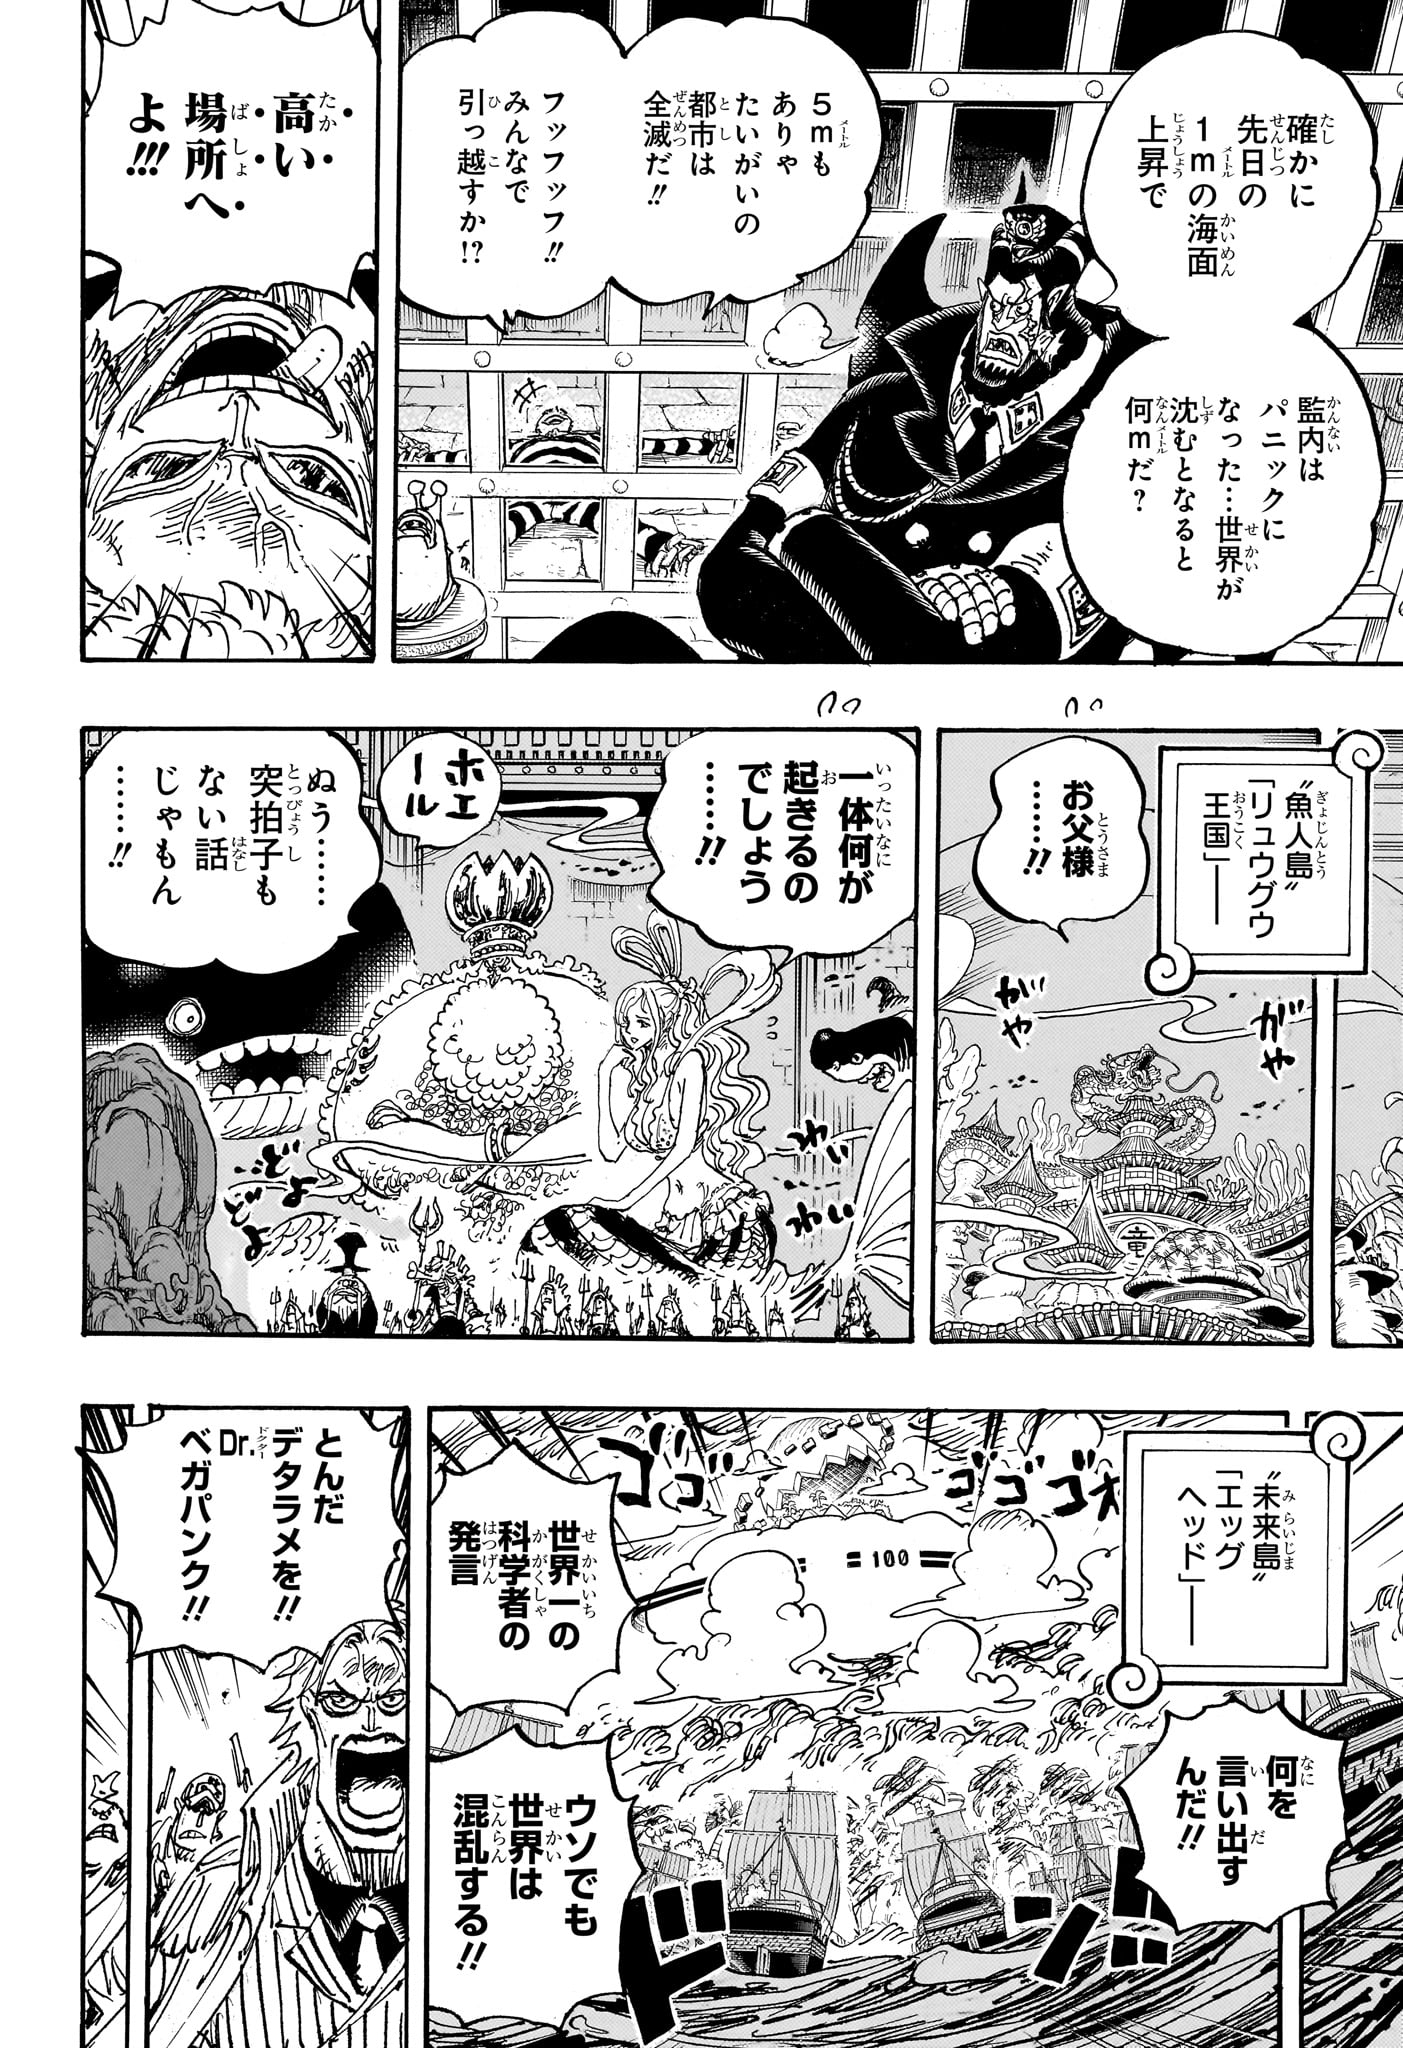 One Piece - Chapter 1114 - Page 4